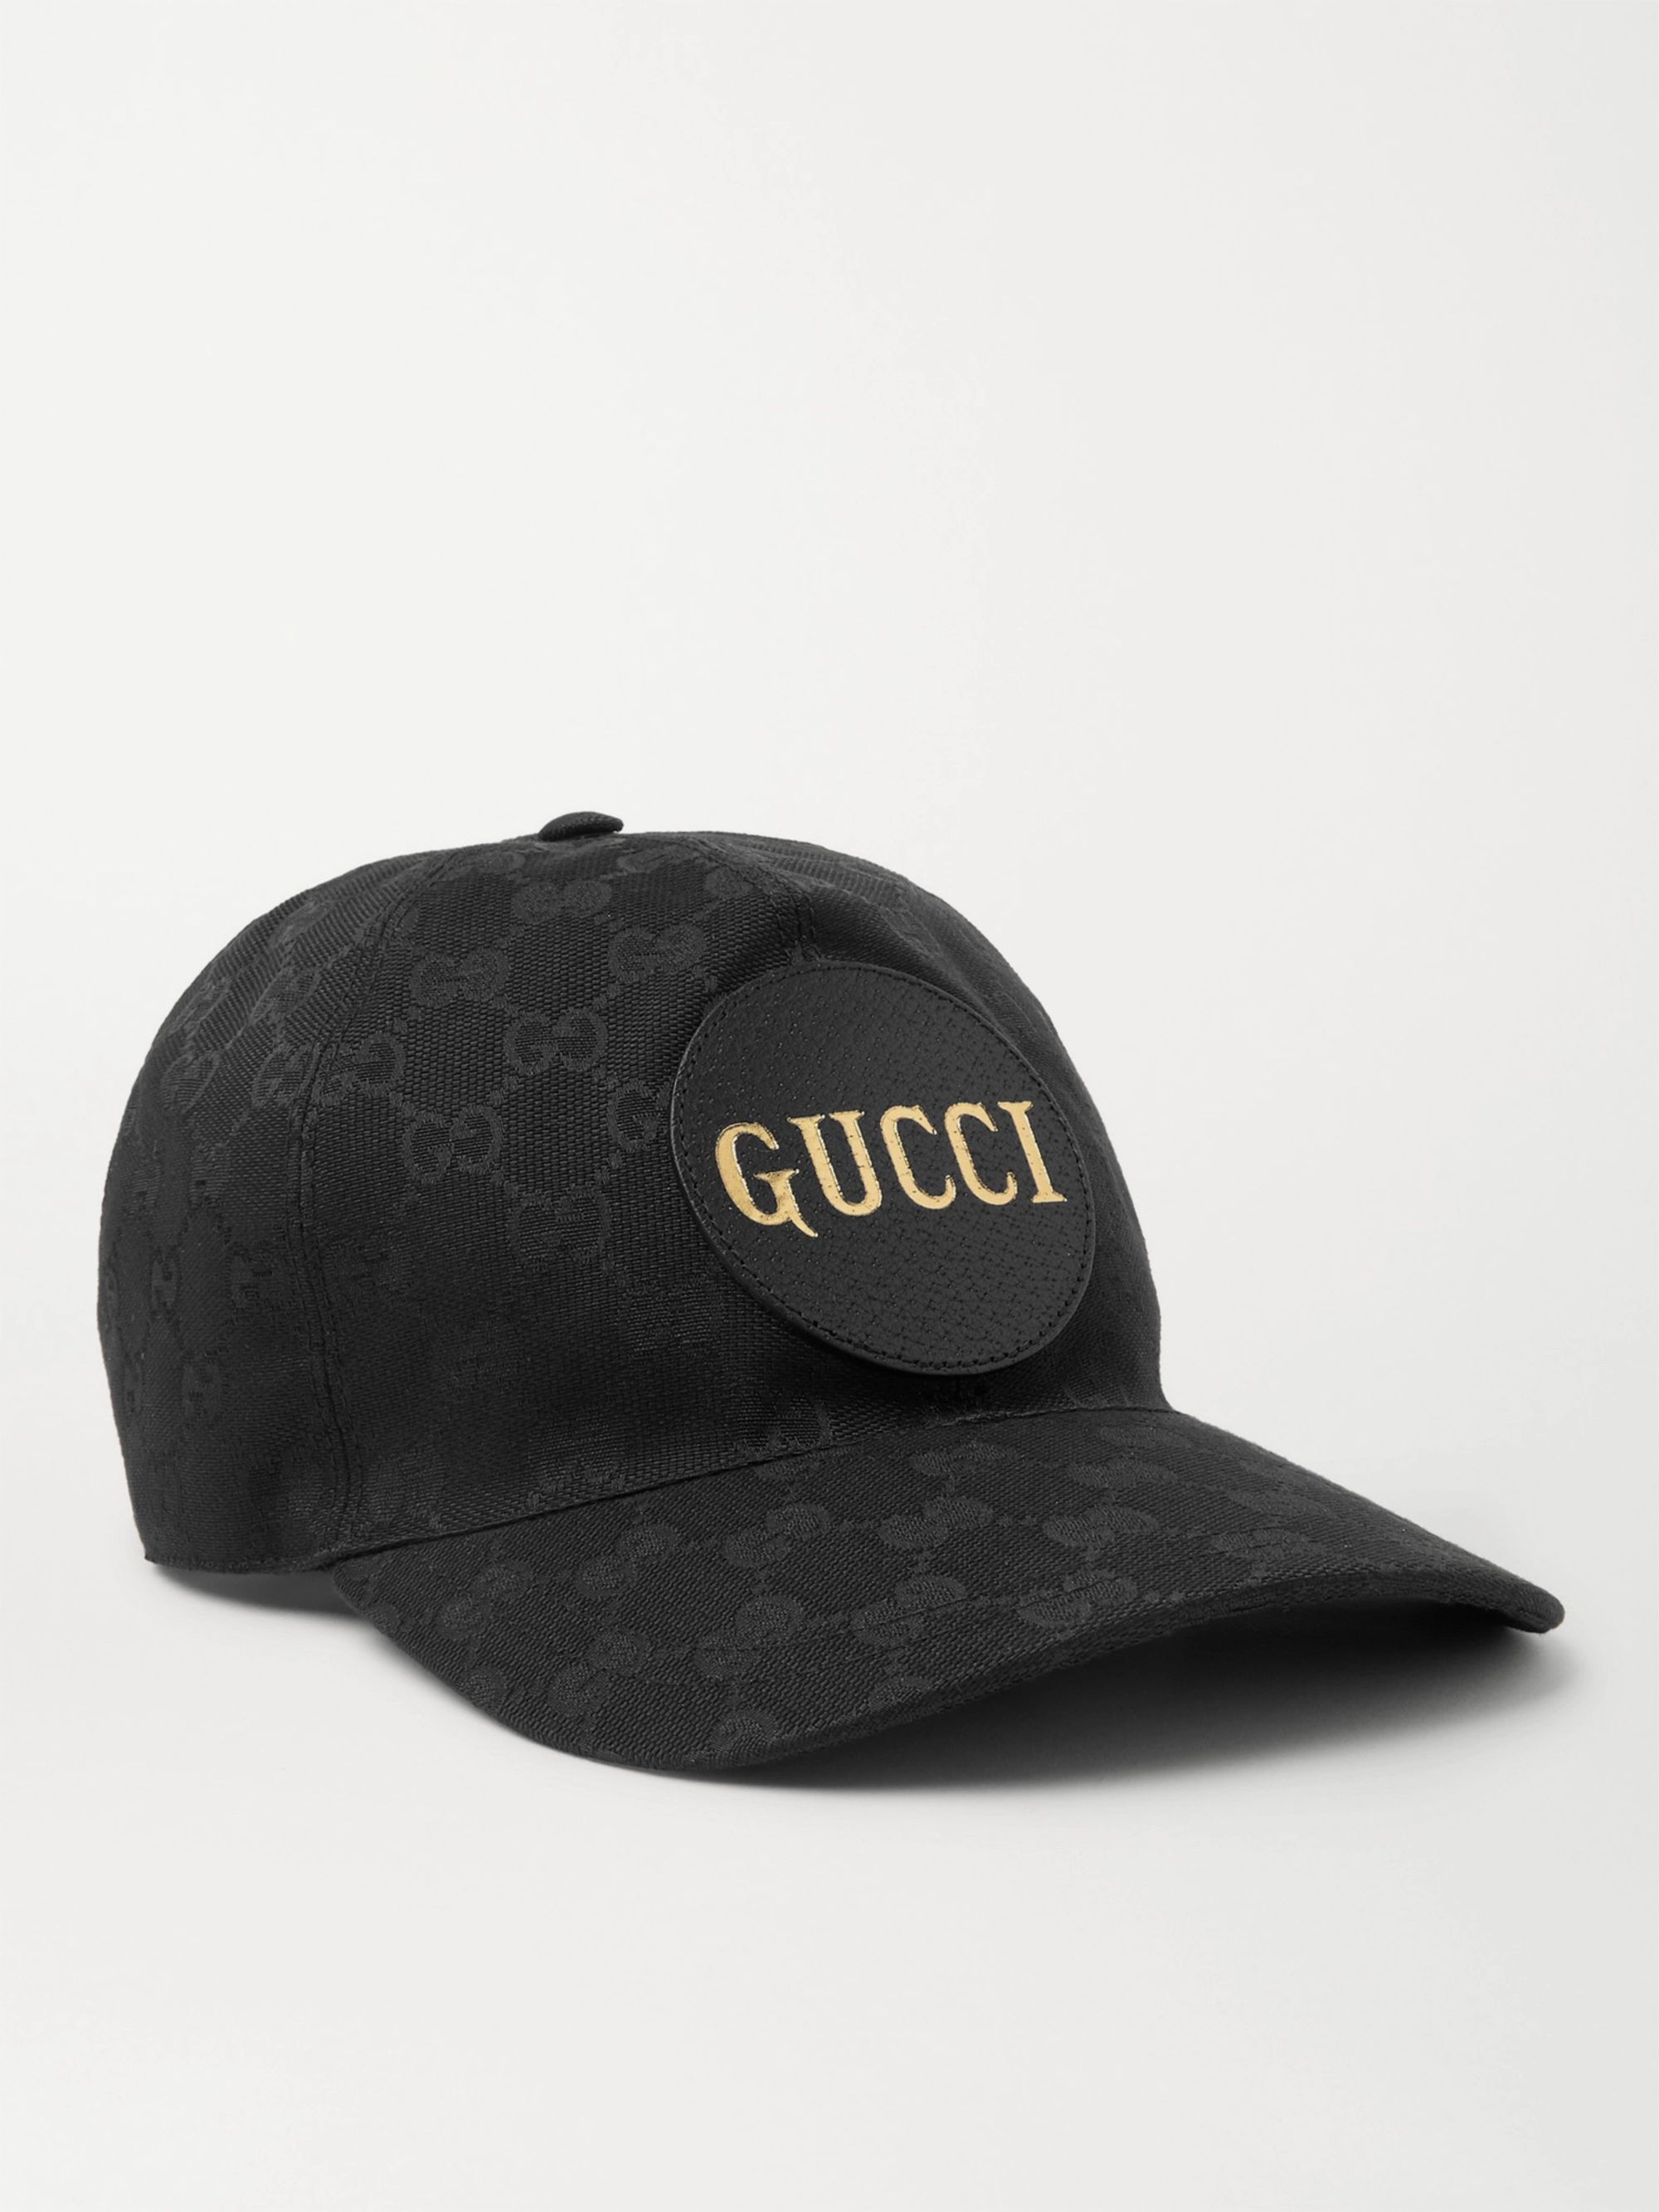 Gucci Hat Leather Online, 55% OFF | lagence.tv